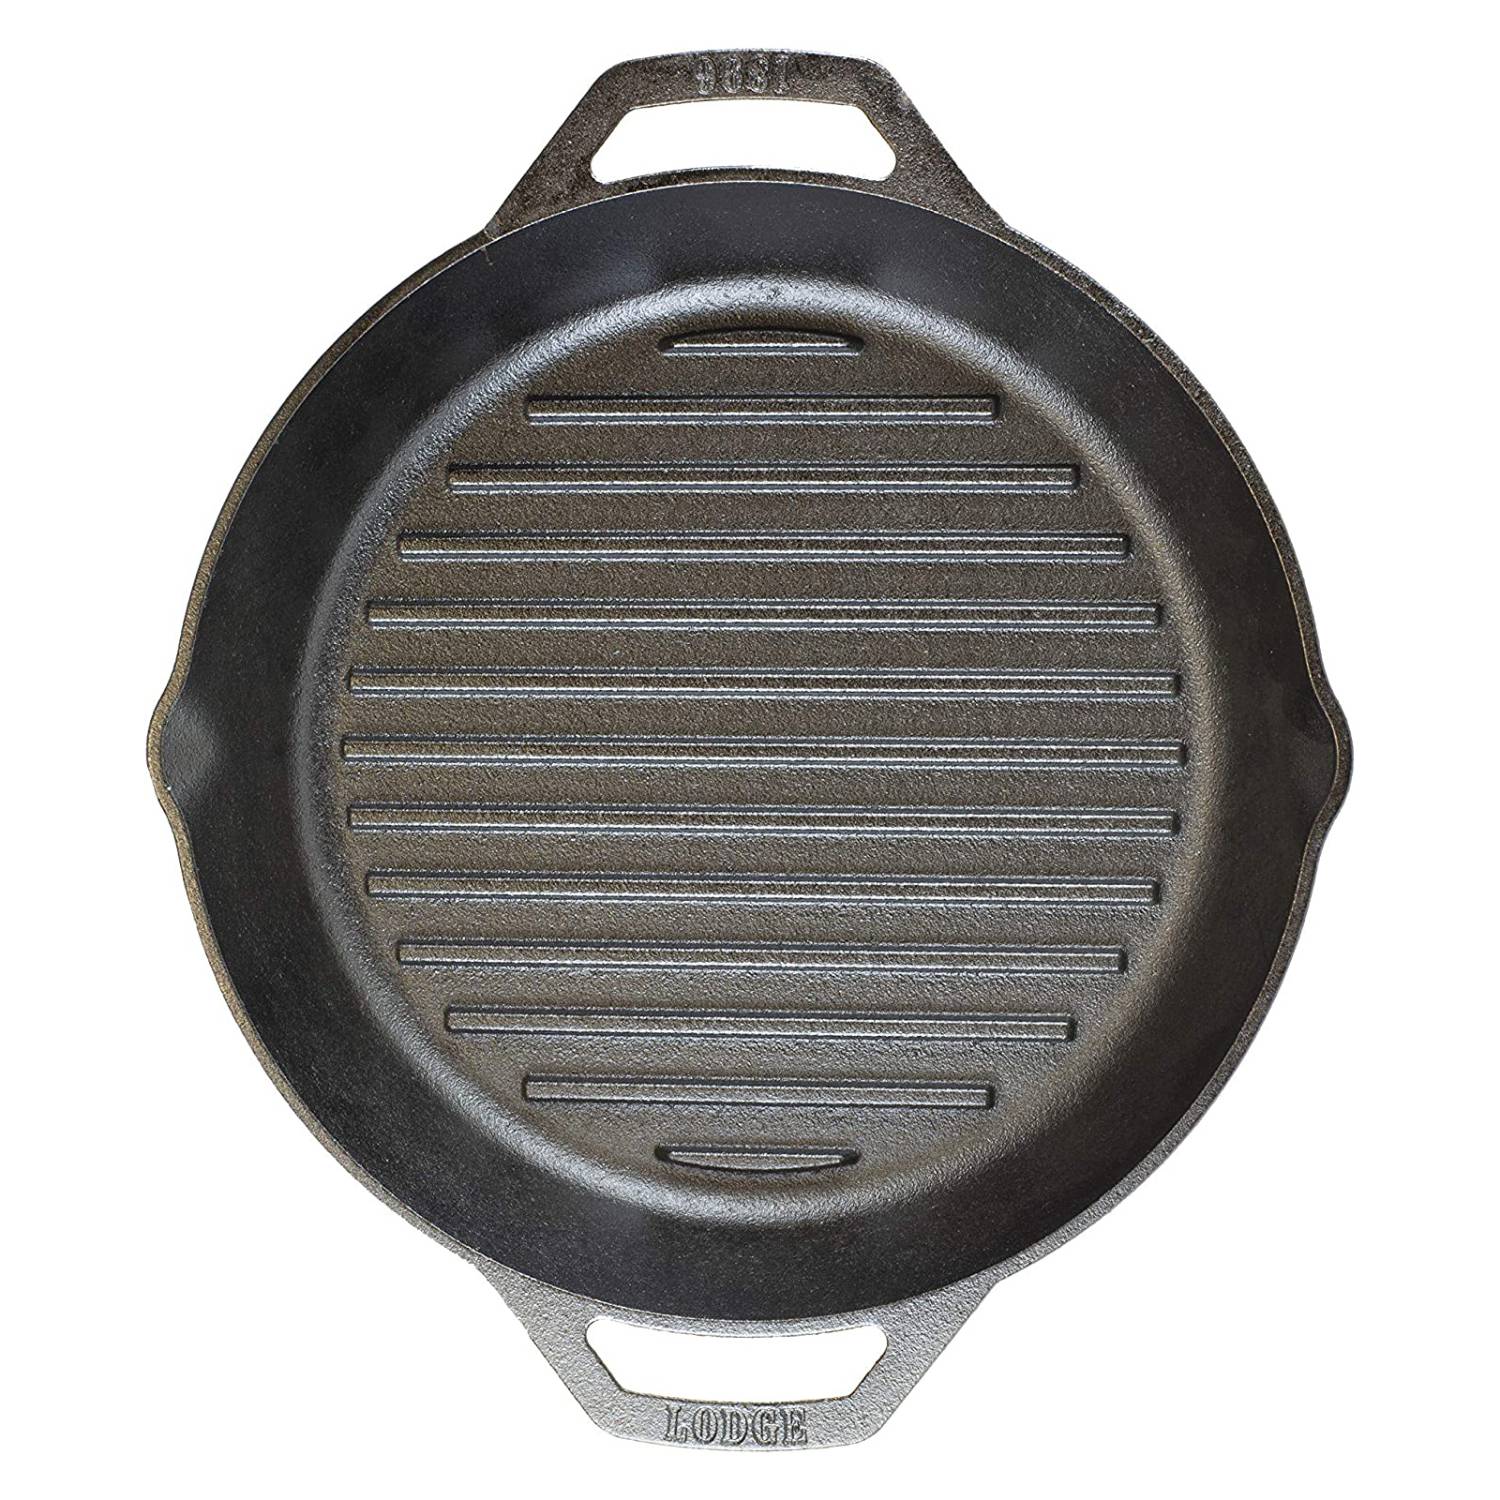 Lodge Cast Iron Grill Pan, Cookware